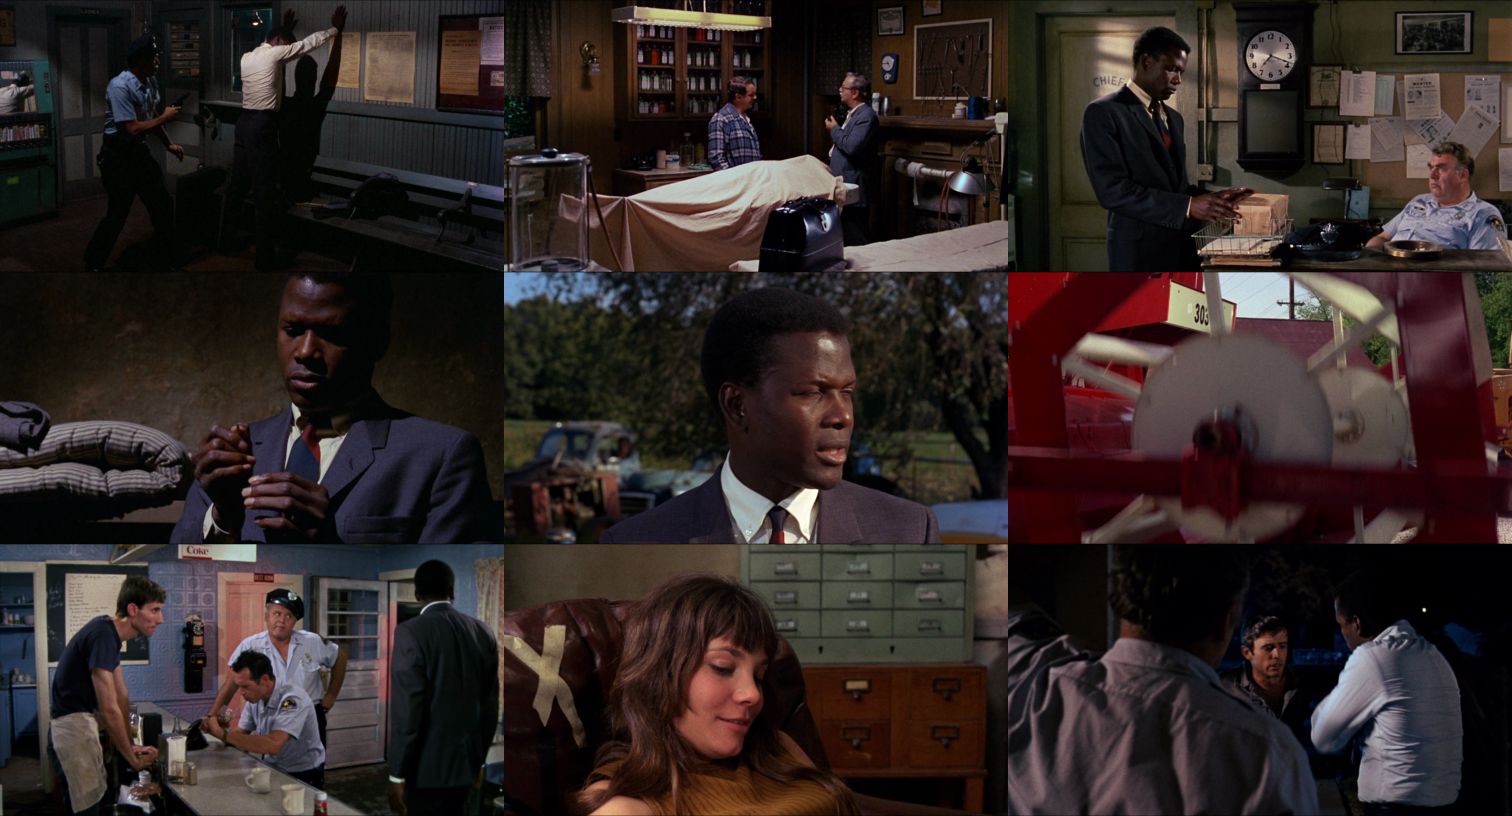 ȵҹ/ҹ׷ In.the.Heat.of.the.Night.1967.REMASTERED.1080p.BluRay.X264-AMIABLE 1-2.png